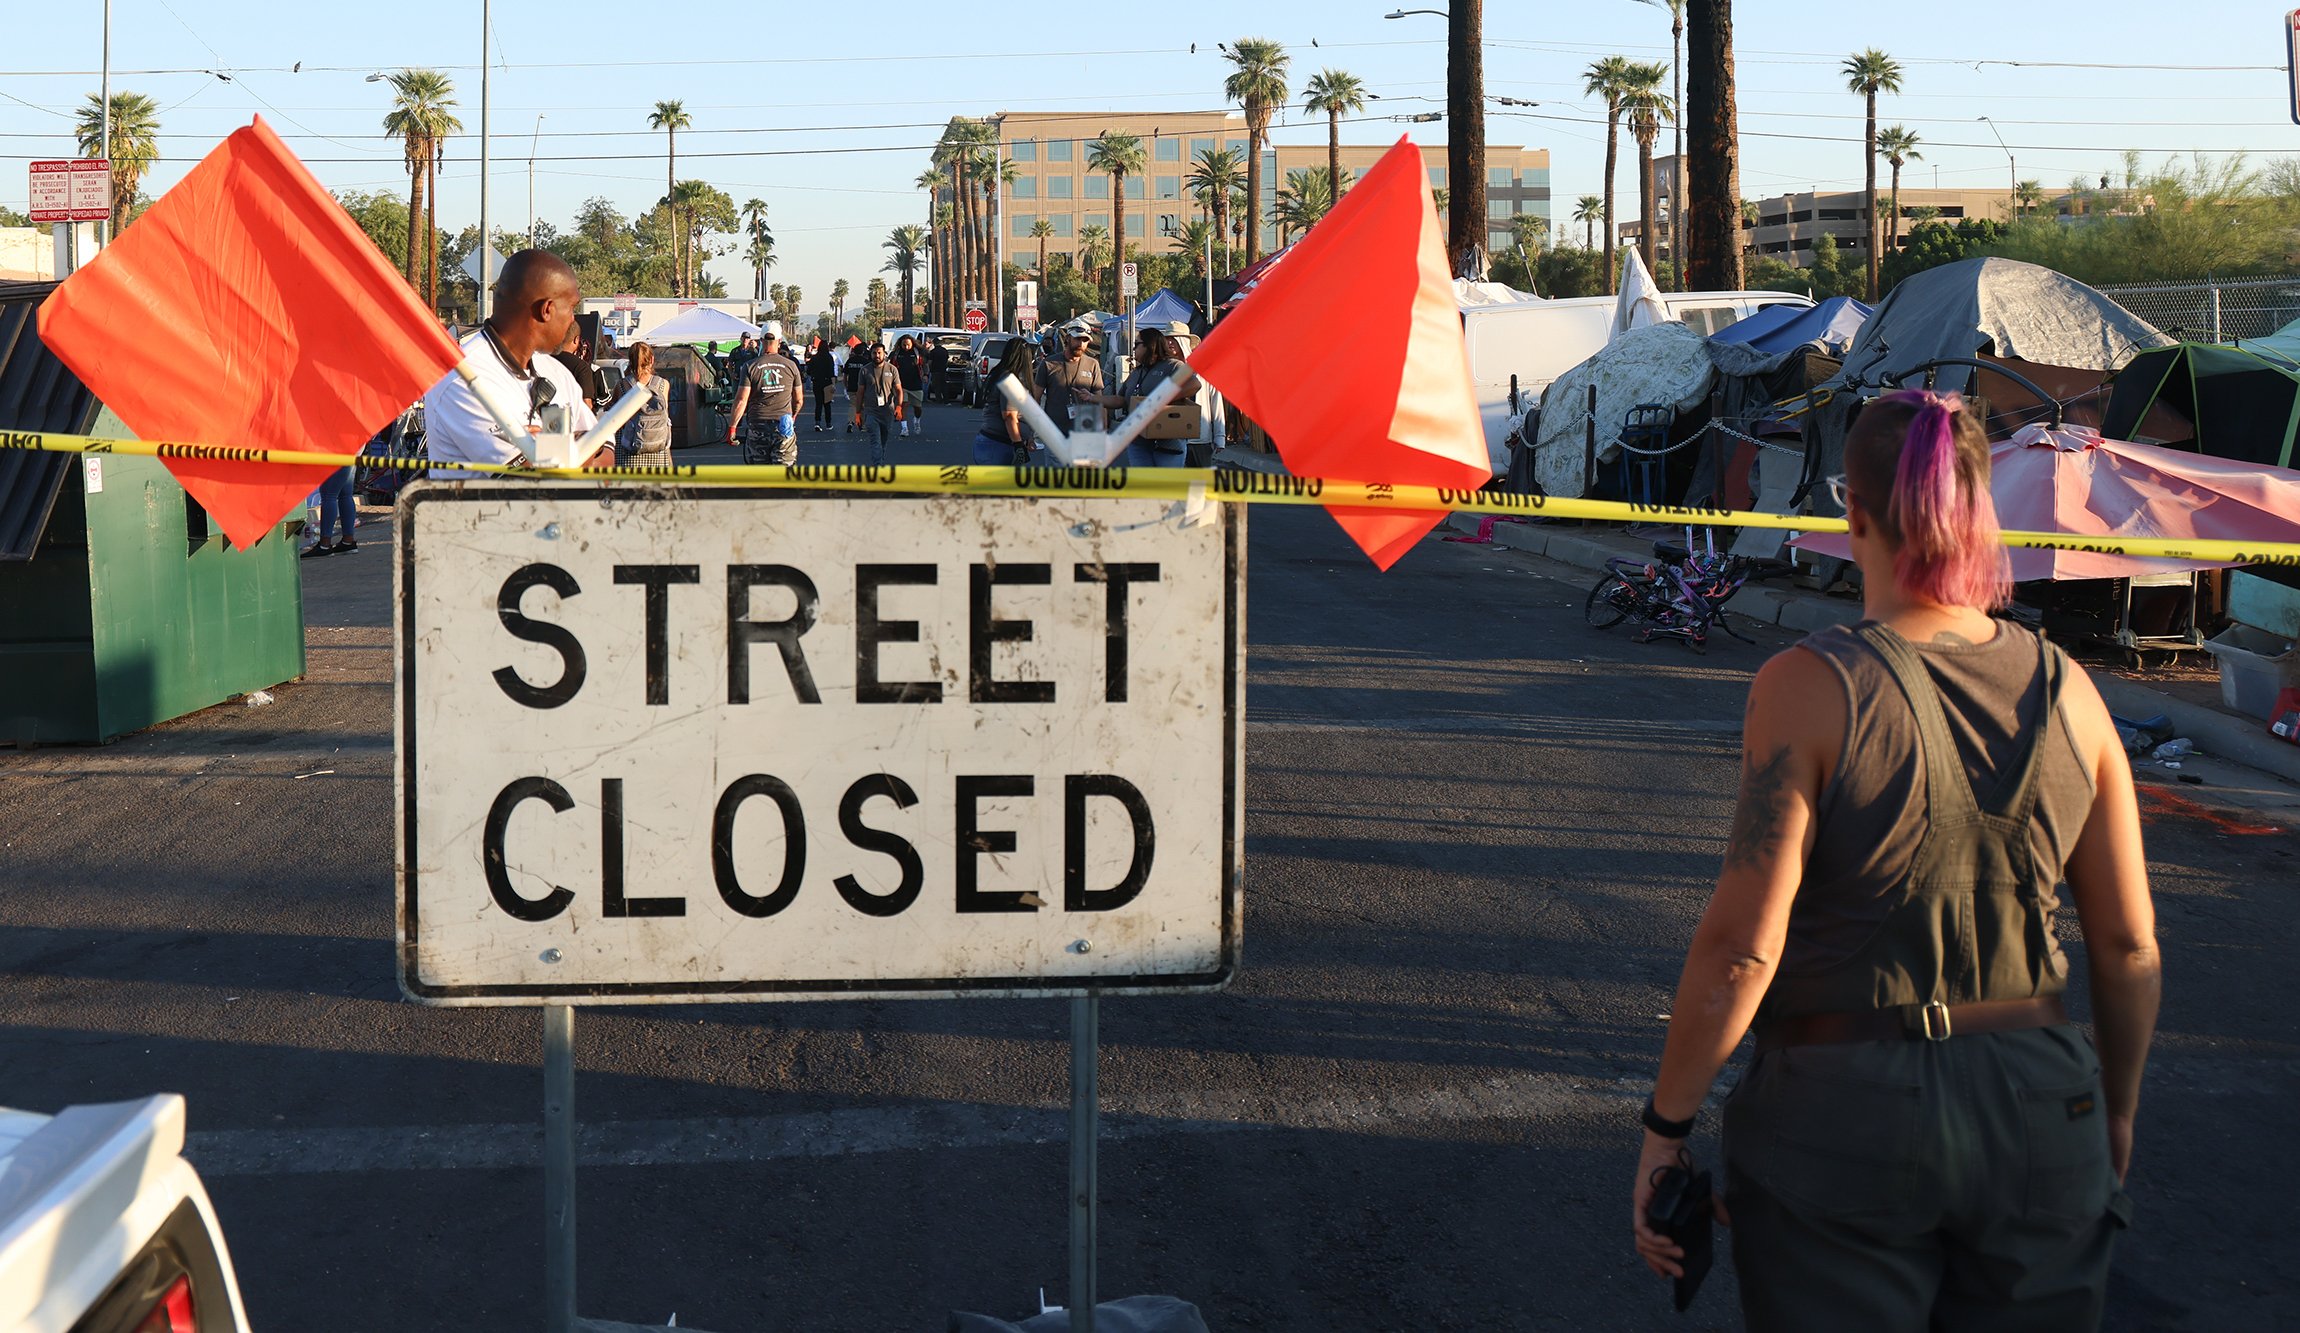 Officials from the city of Phoenix block off 12th Avenue between Jefferson and Madison streets on the morning of Oct. 20 to facilitate the clearing of a homeless encampment under a court order issued earlier this year. (Photo by John Leos/Cronkite News)
